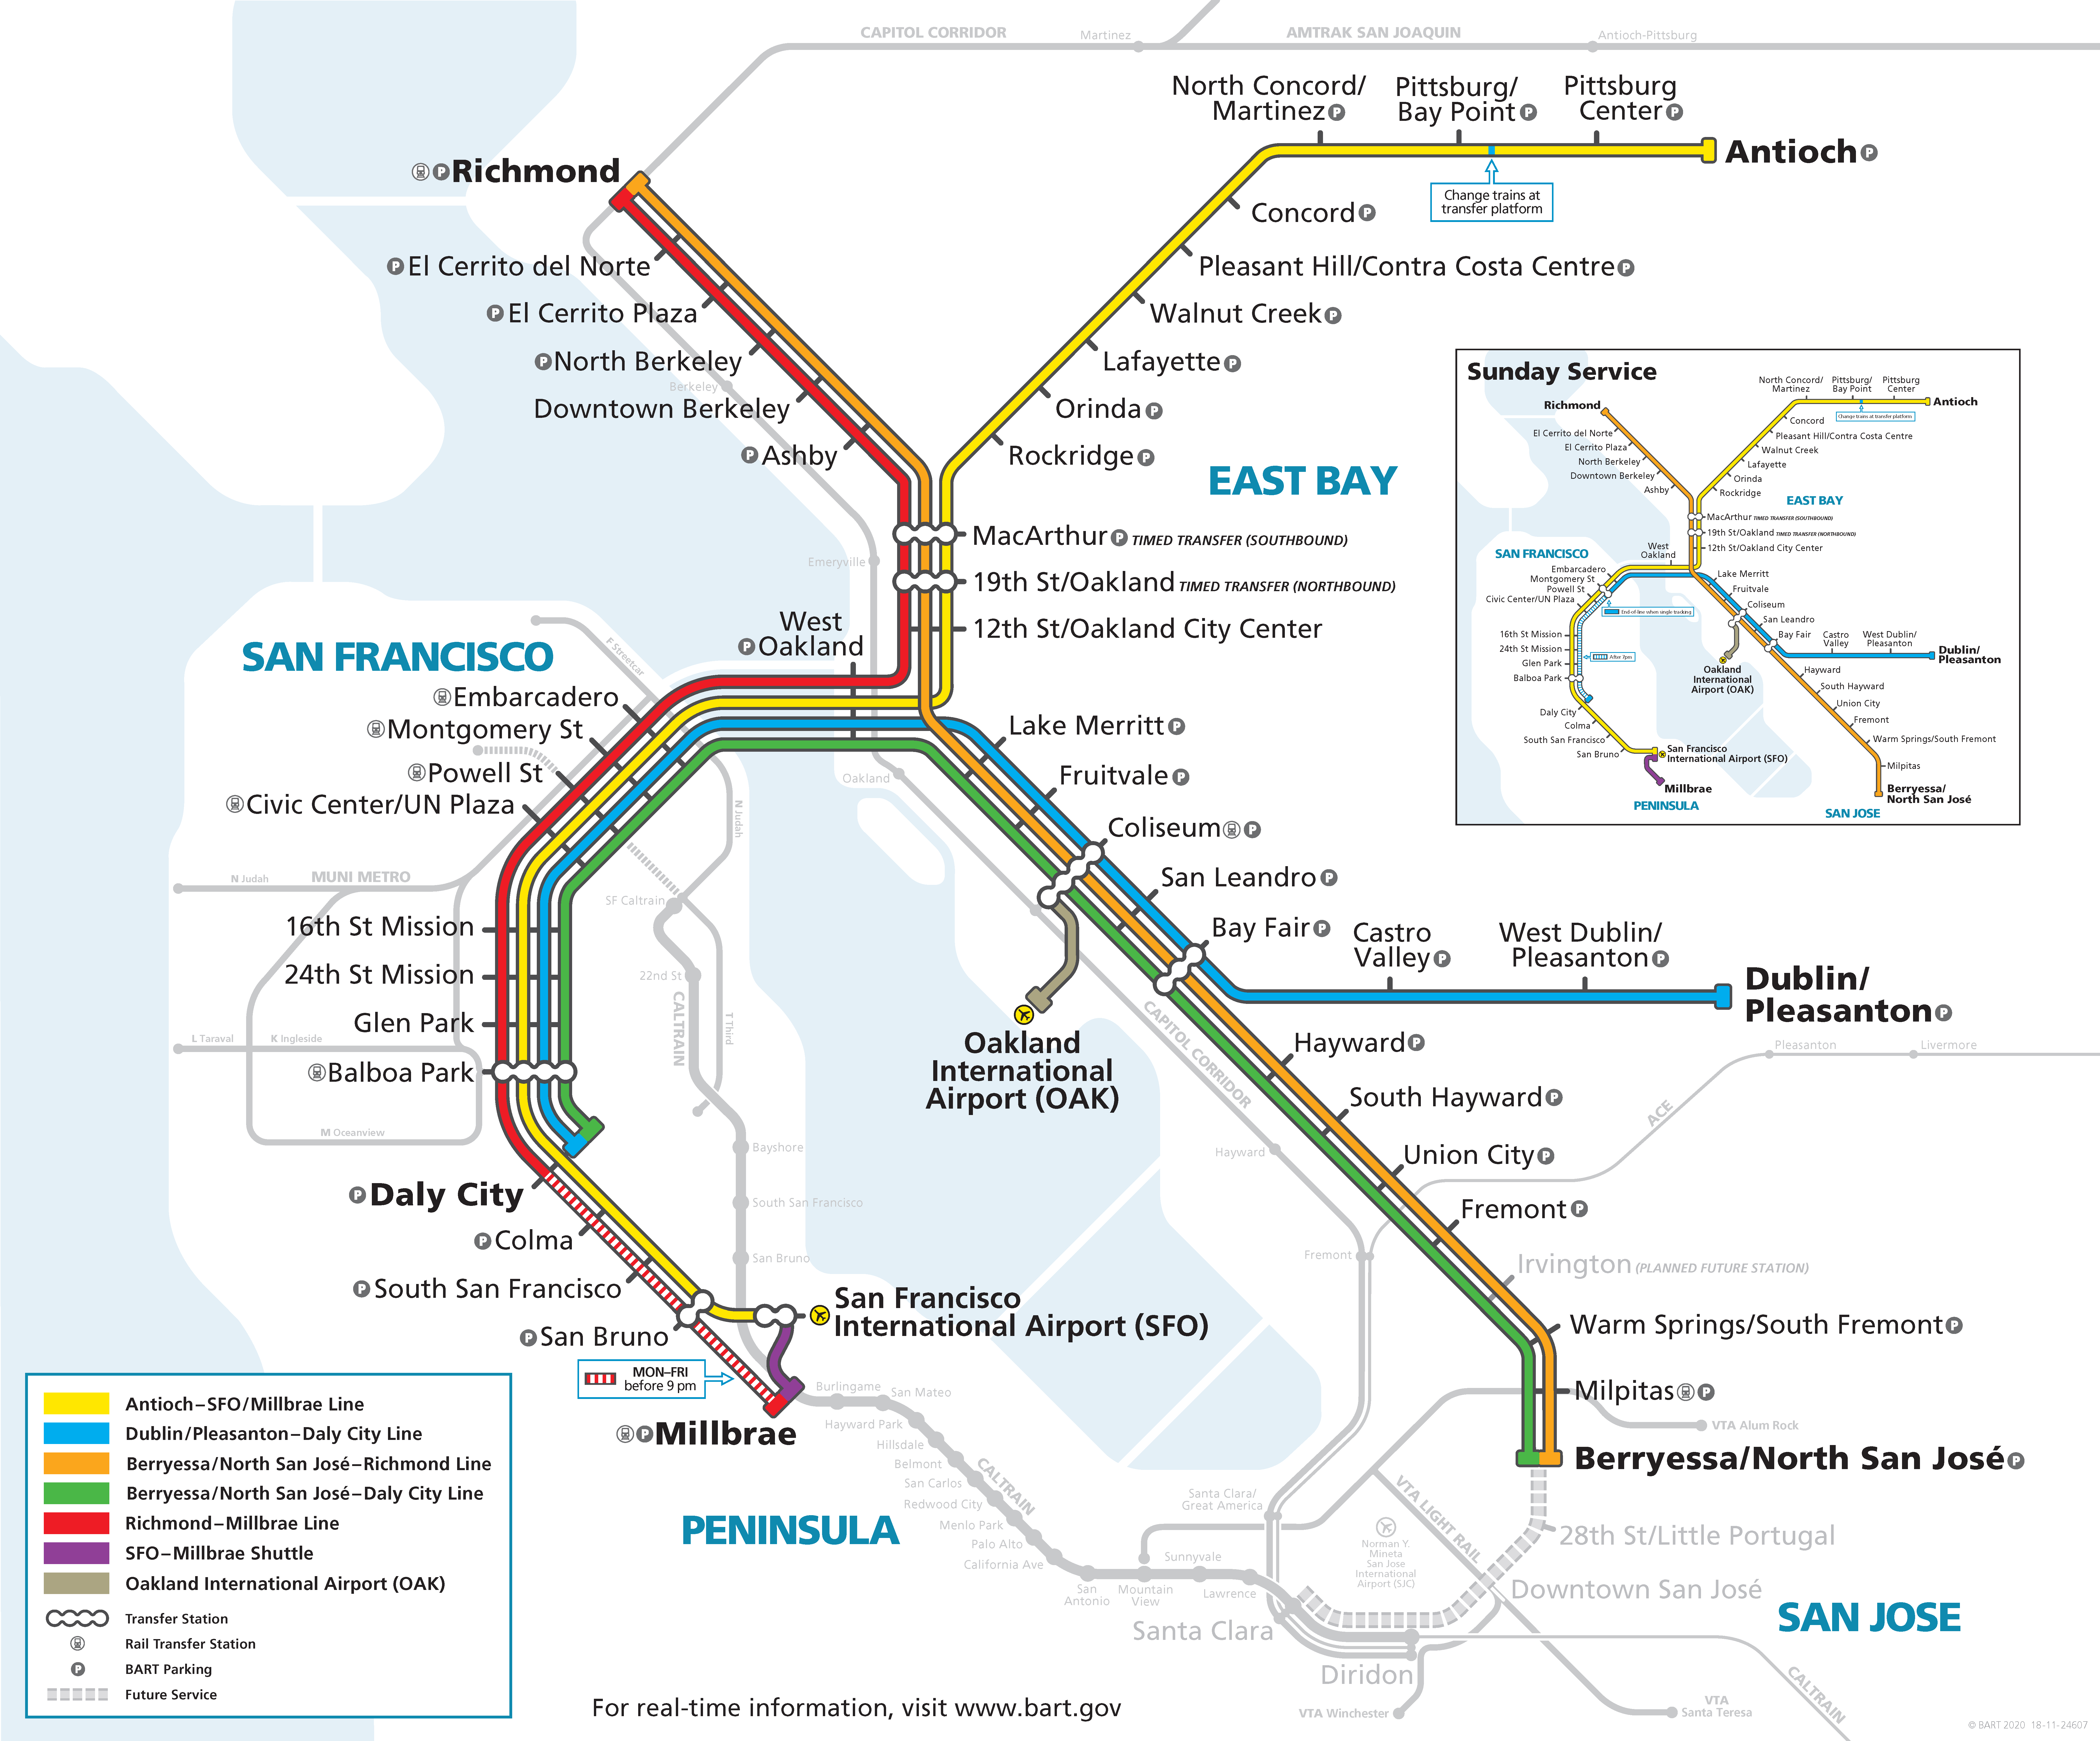 BART unveils system map for future Milpitas and Berryessa service Bay